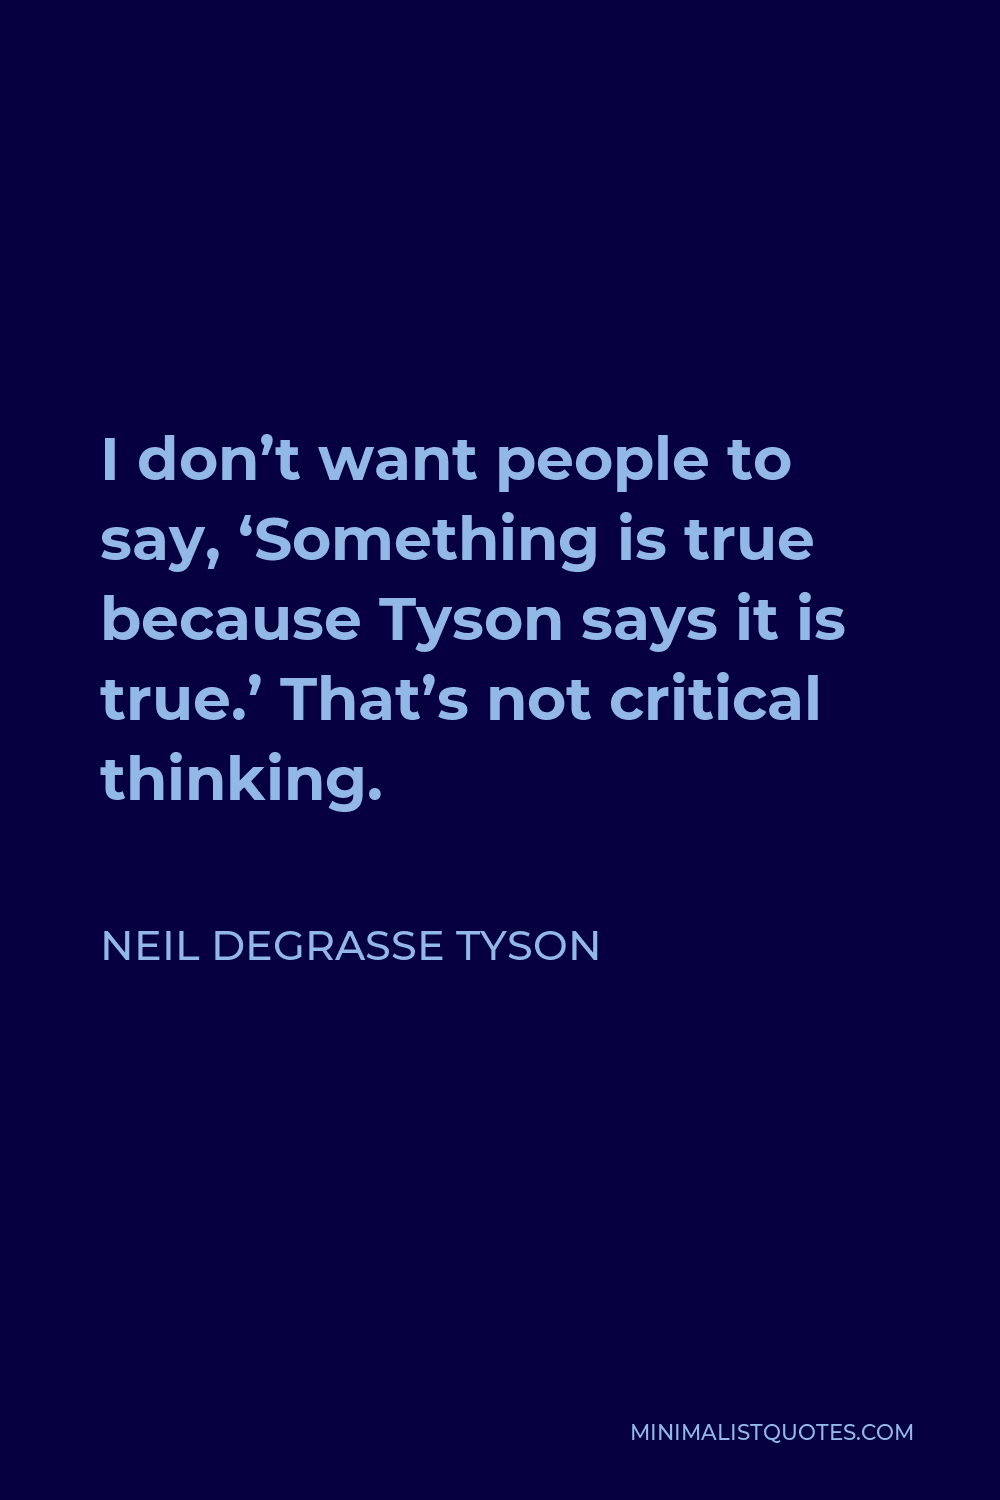 Neil deGrasse Tyson Quote - I don’t want people to say, ‘Something is true because Tyson says it is true.’ That’s not critical thinking.